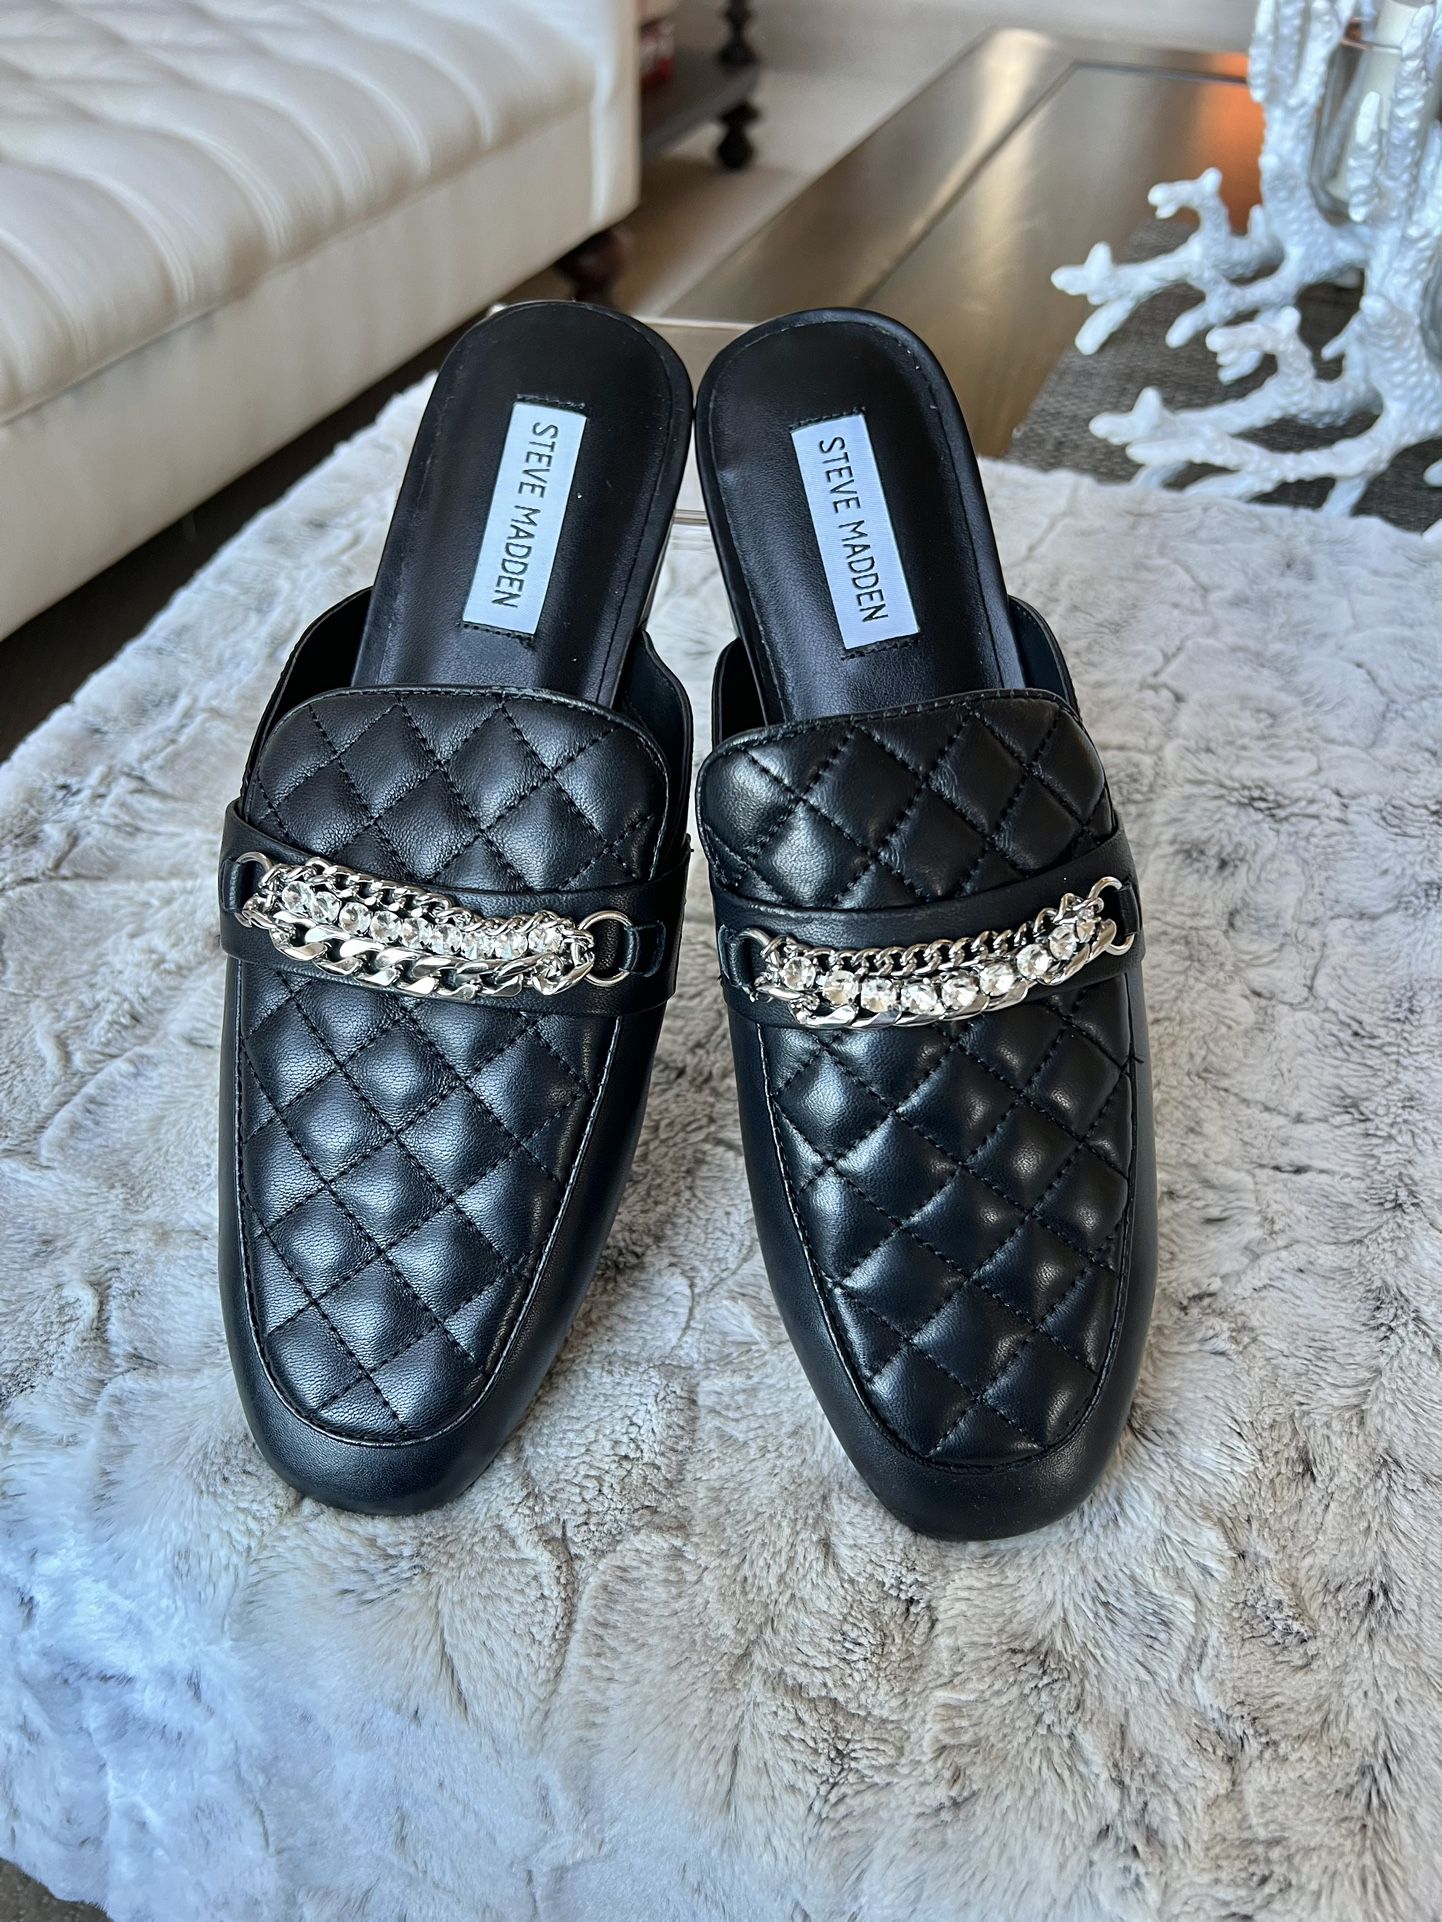 New Women’s Steve Madden Kalista Quilted Mules, Size 10